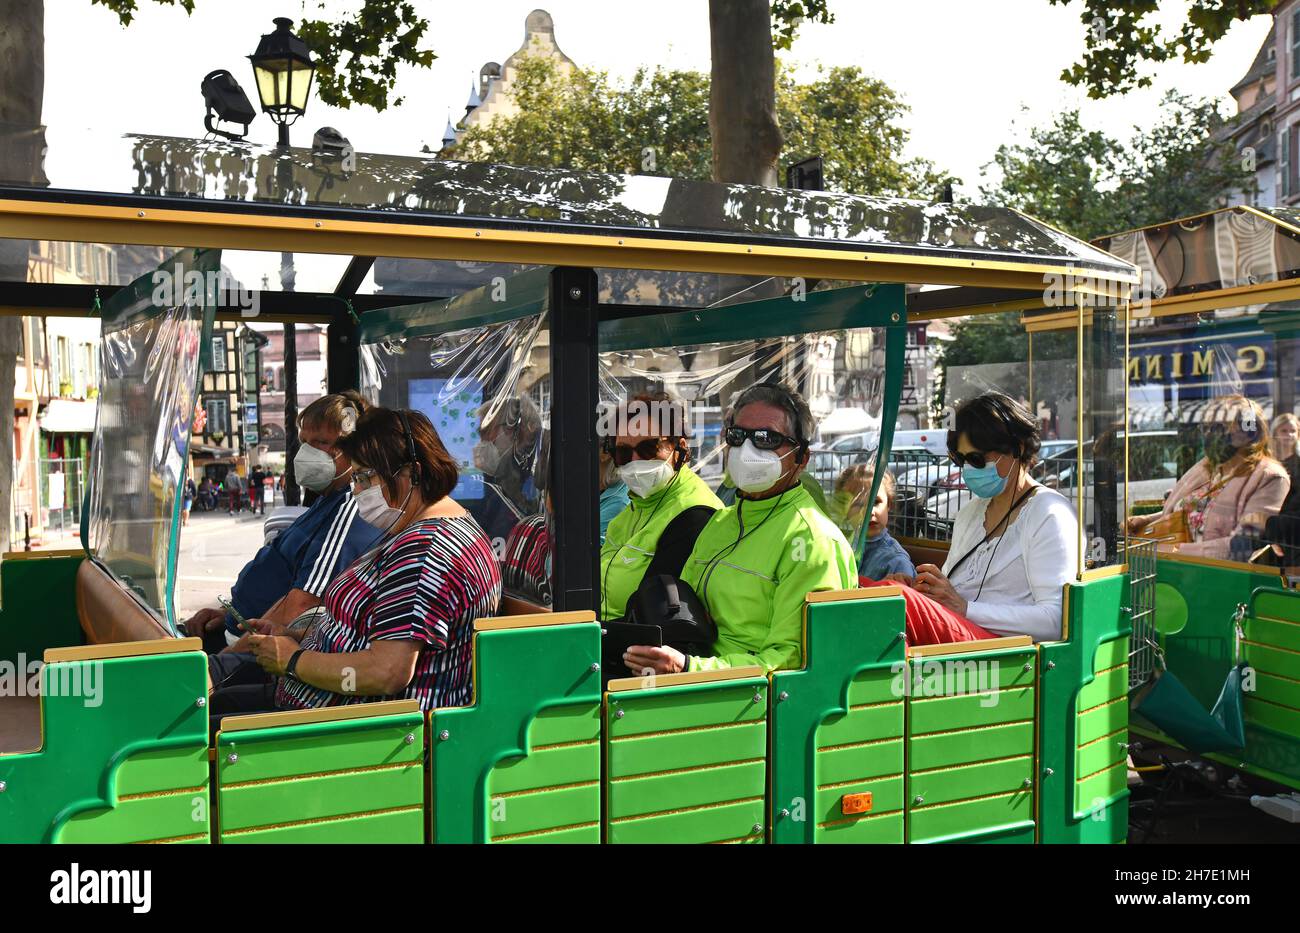 Tourists wearing Covid 19 pandemic face masks on sight seeing train in Colmar in Alsace region of France Stock Photo